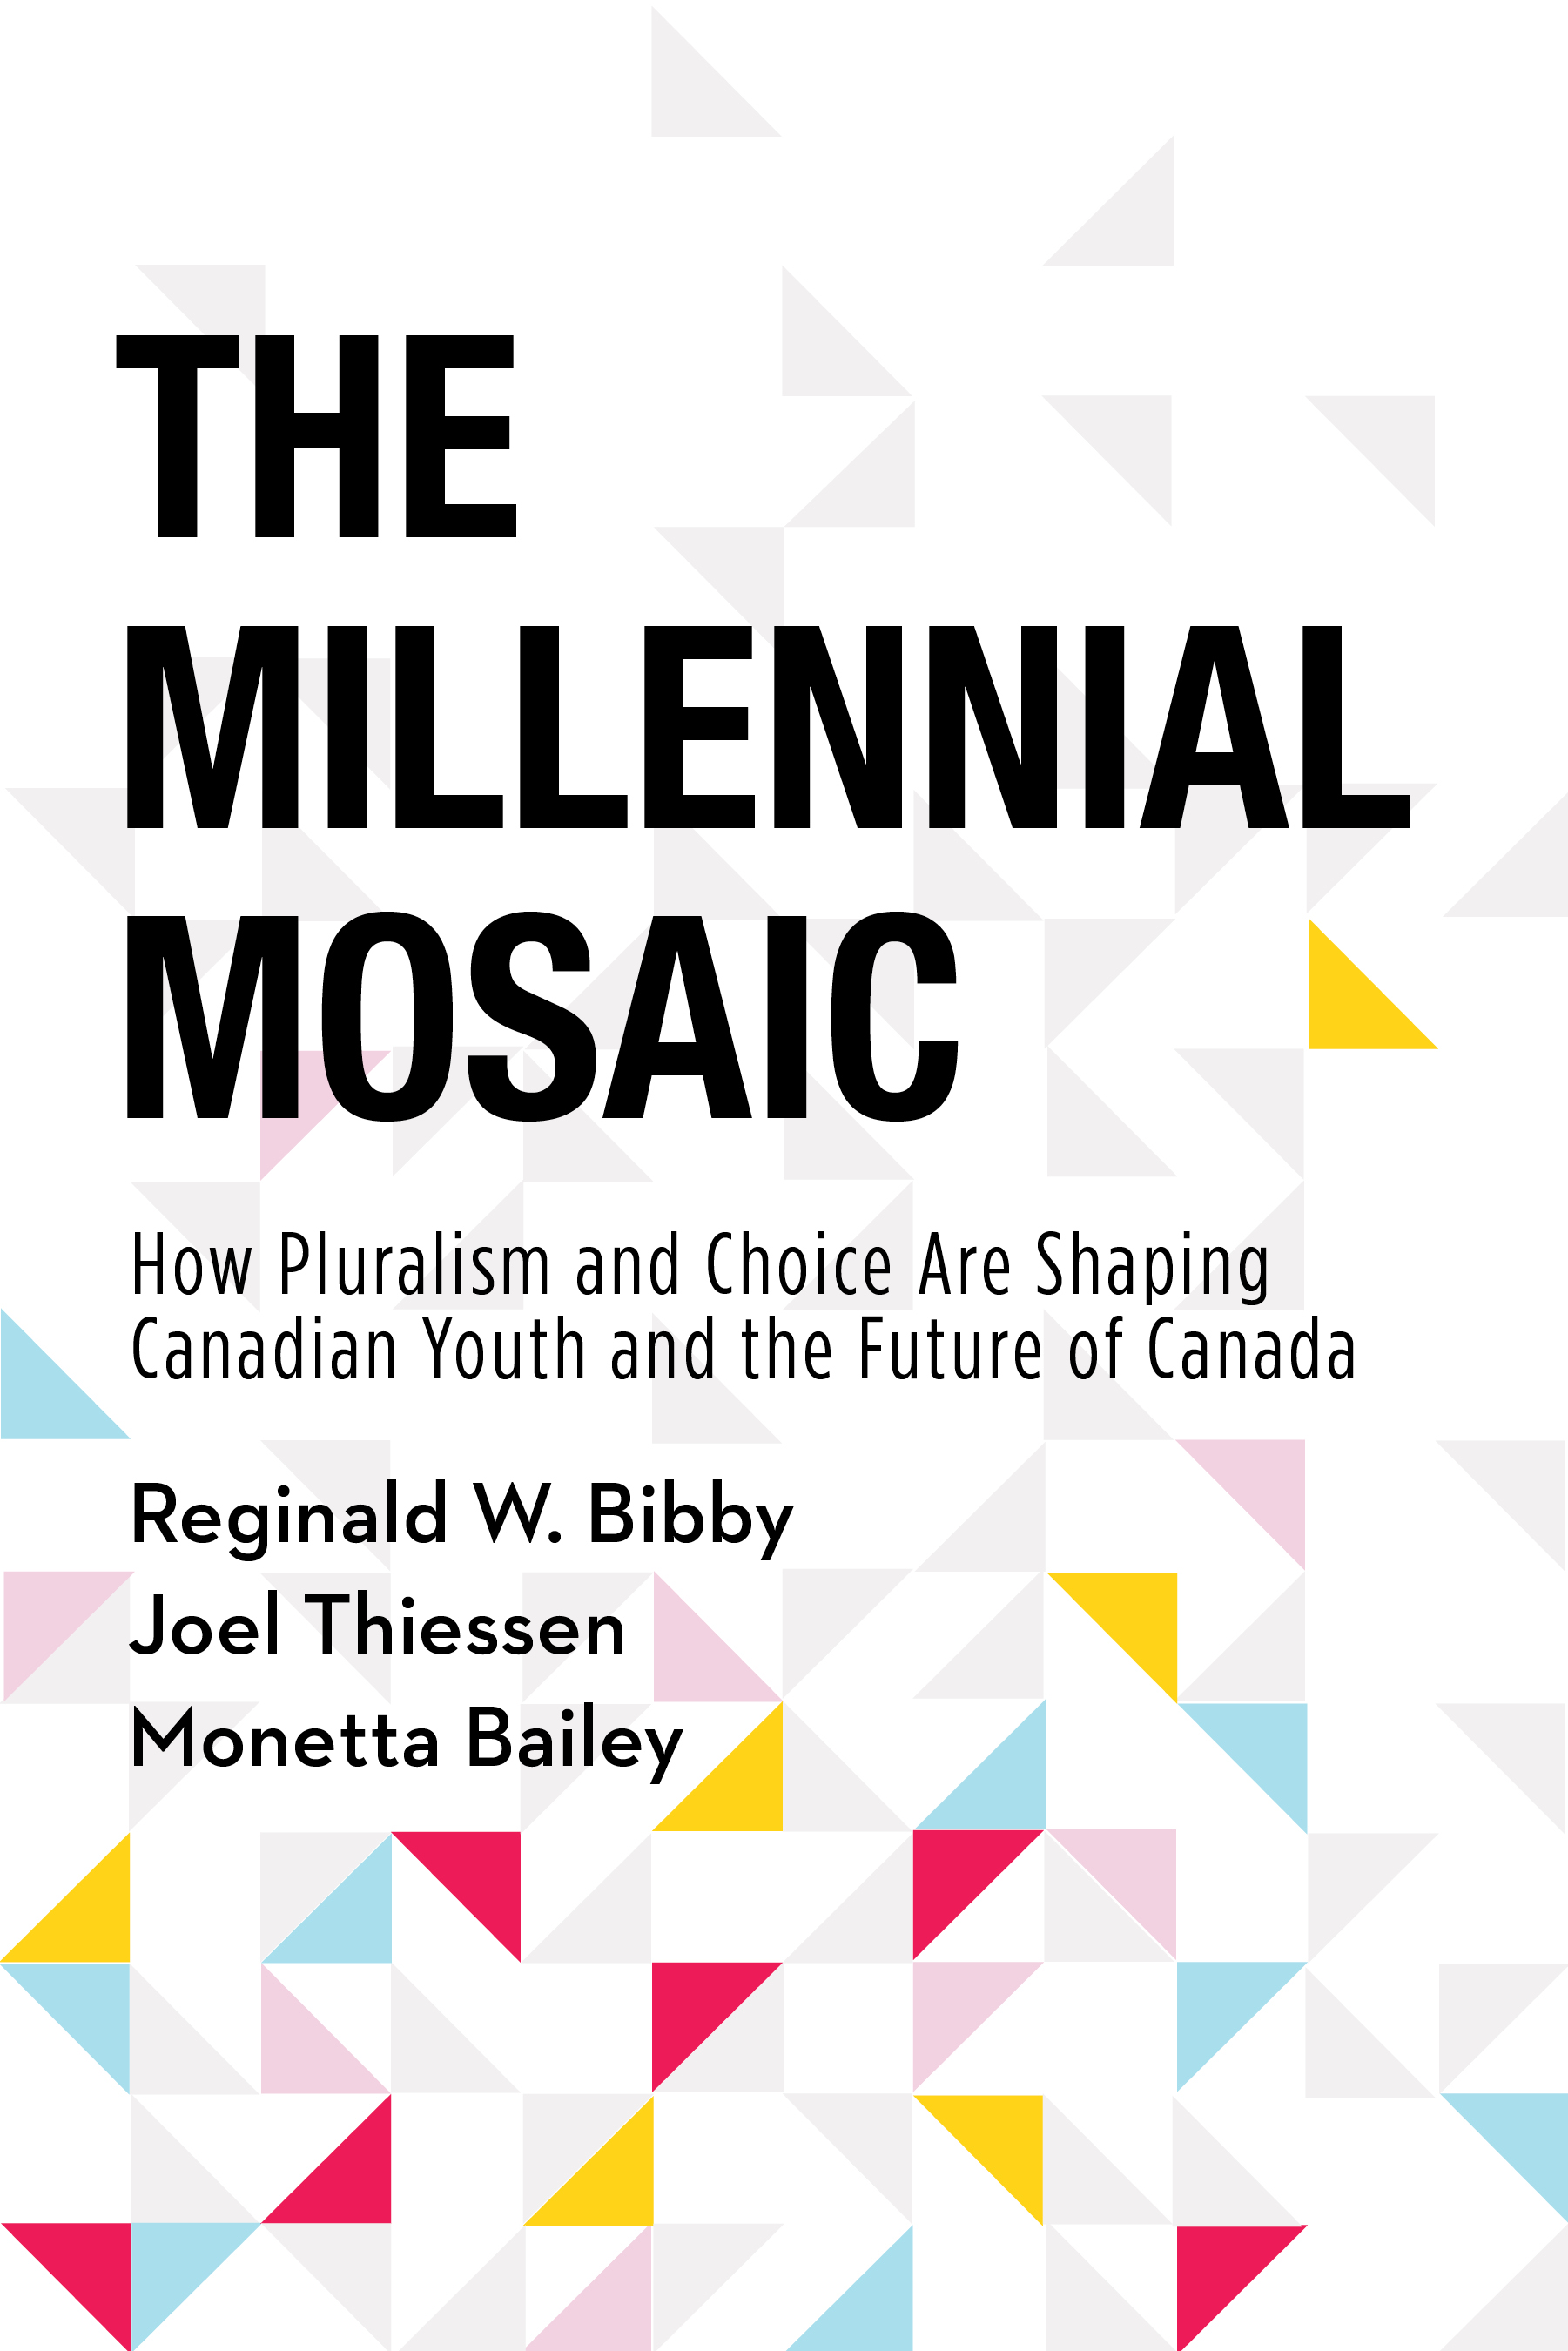 MILLENNIAL MOSAIC: HOW PLURALISM AND CHOICE ARE SHAPING CANADIAN YOUTH AND THE FUTURE OF CANADA